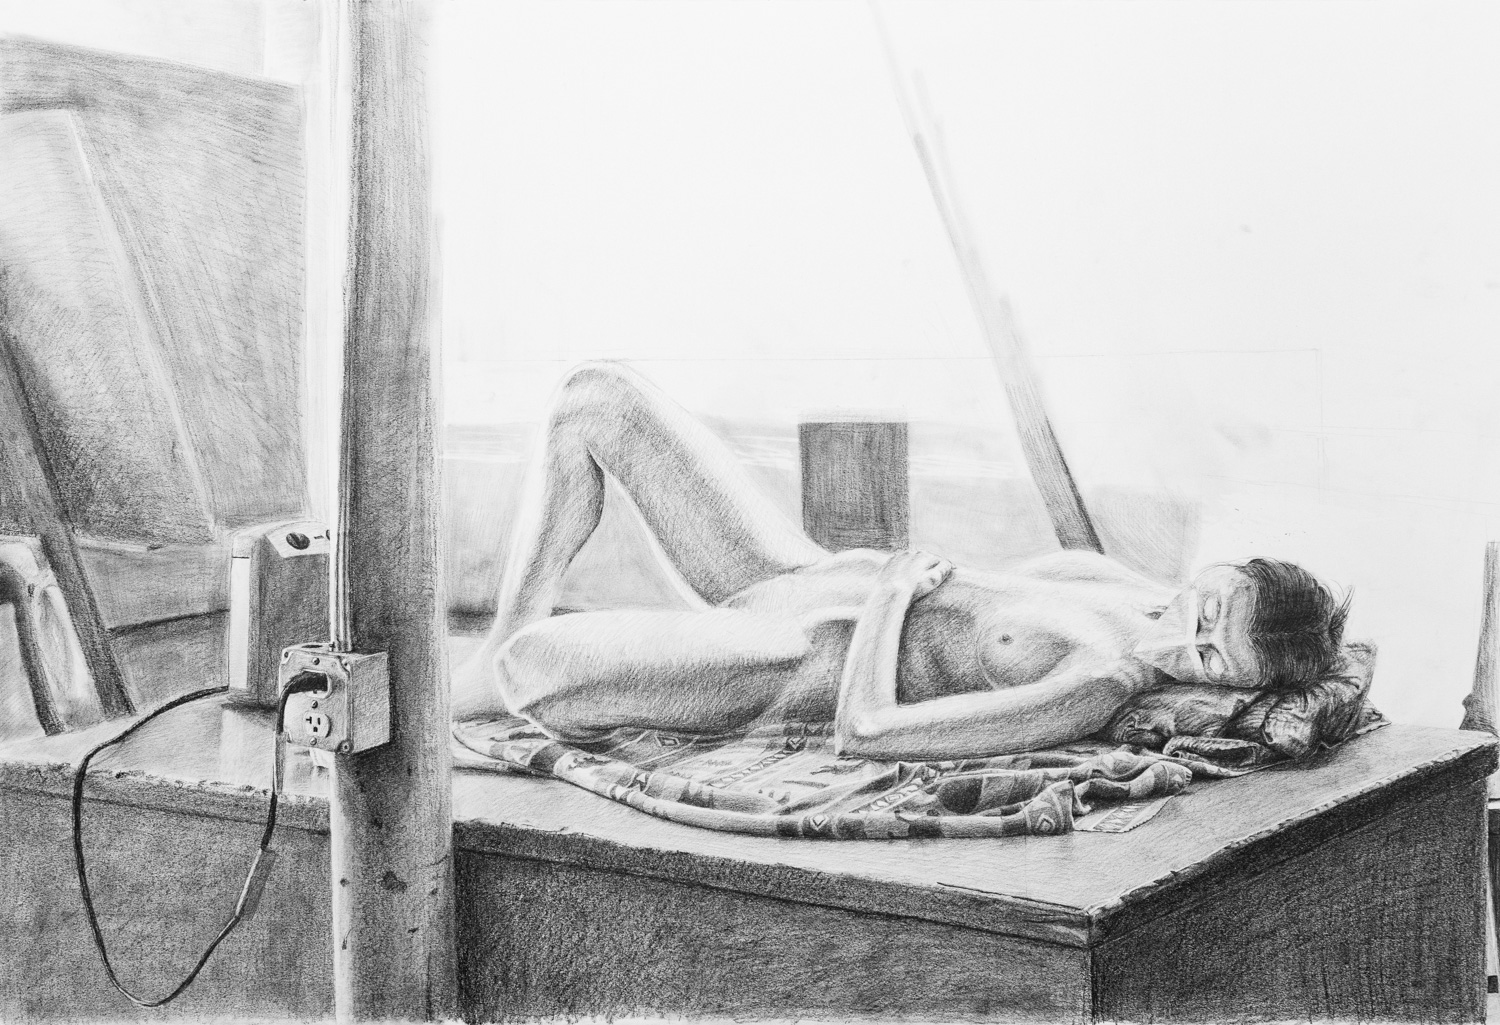 Large graphite drawing of a nude figure lying on an elevated surface.